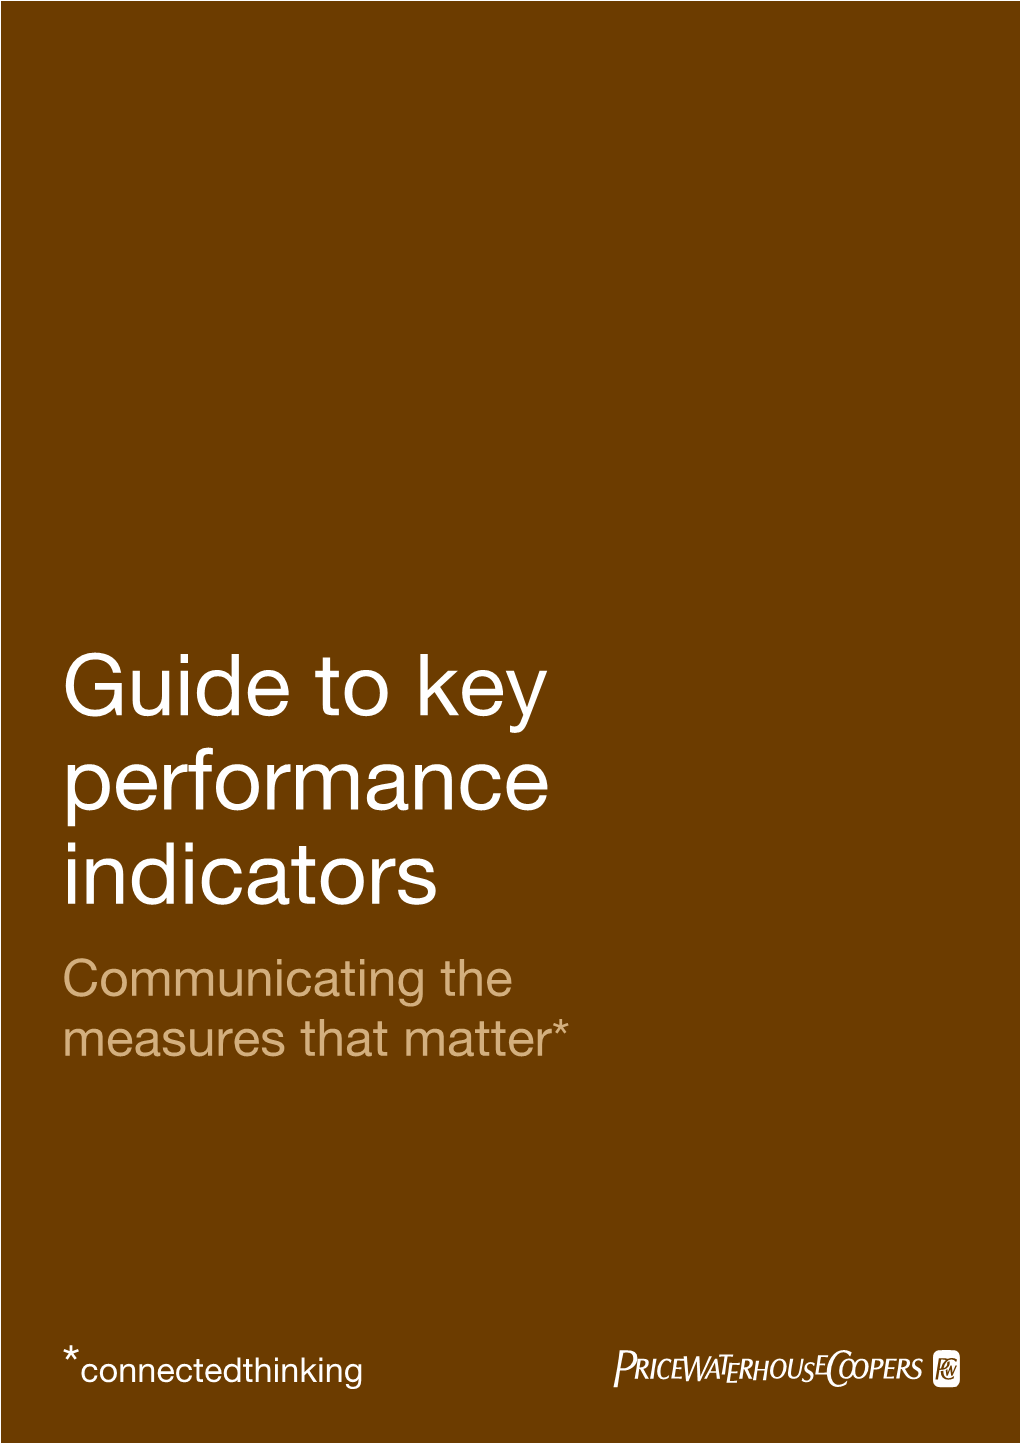 Guide to Key Performance Indicators Communicating the Measures That Matter*